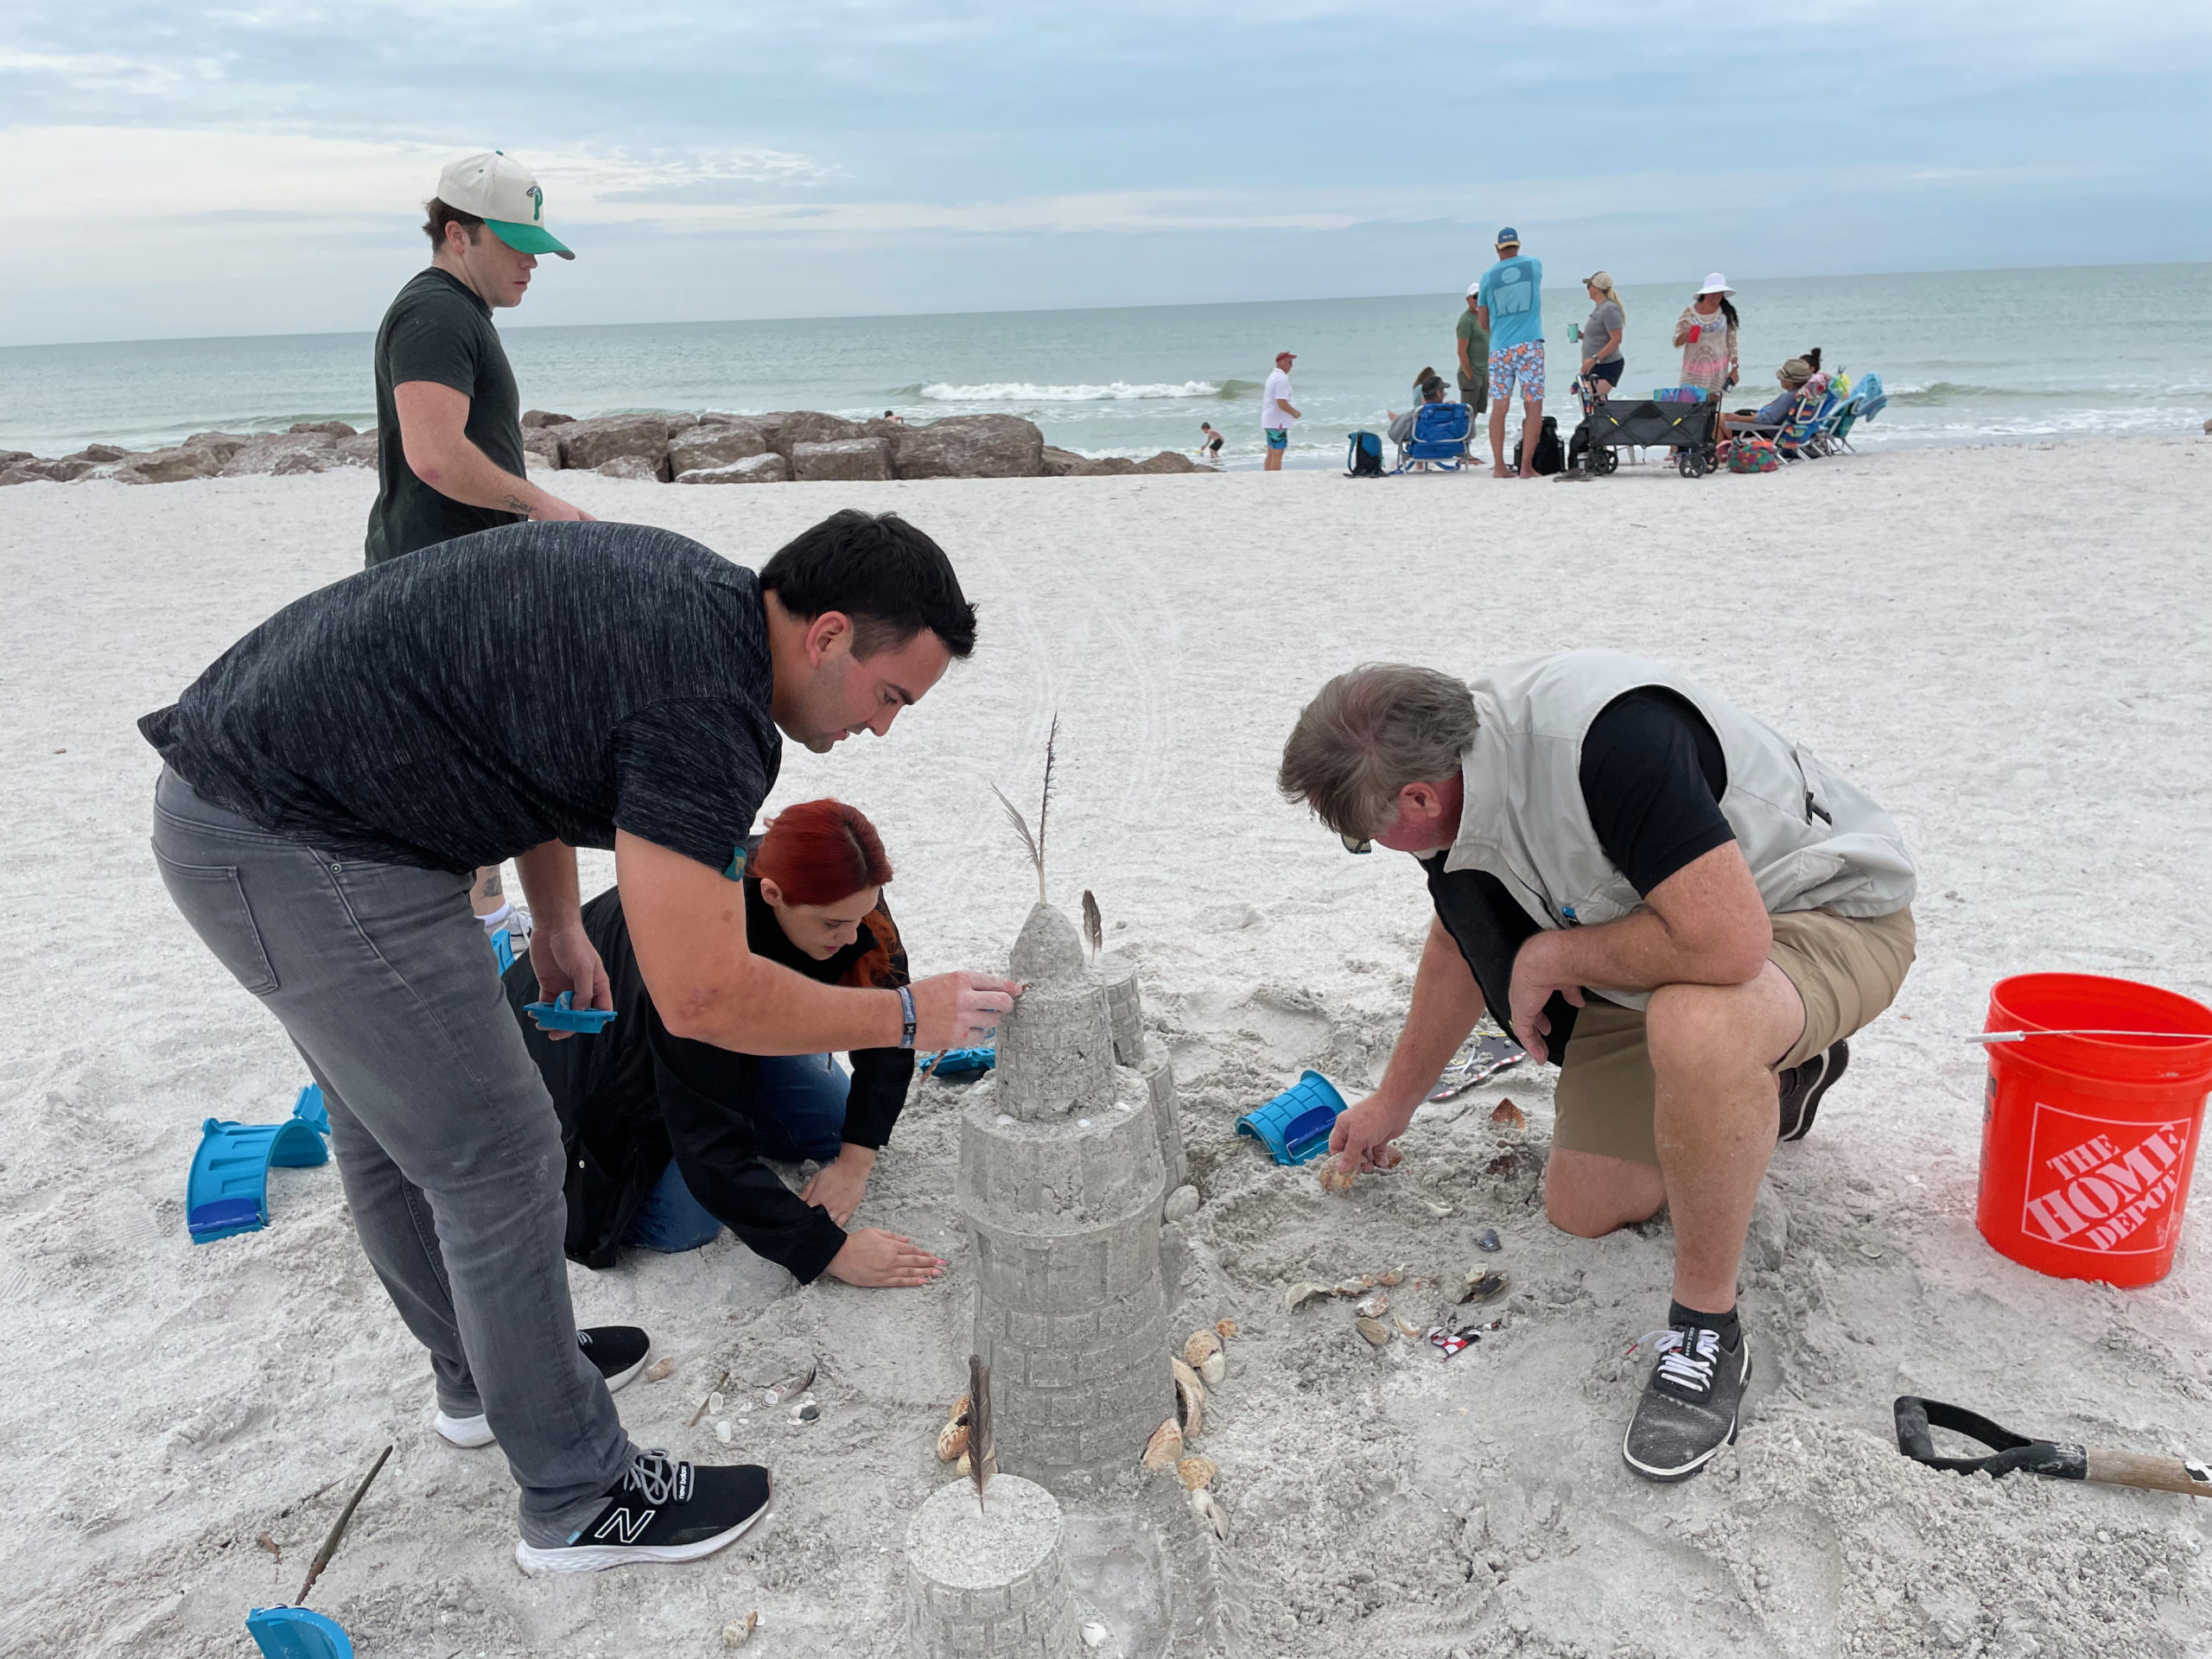 Three people bend over a sandcastle on the beach. There are sandcastle molds, shells, and seaweed in the castle.